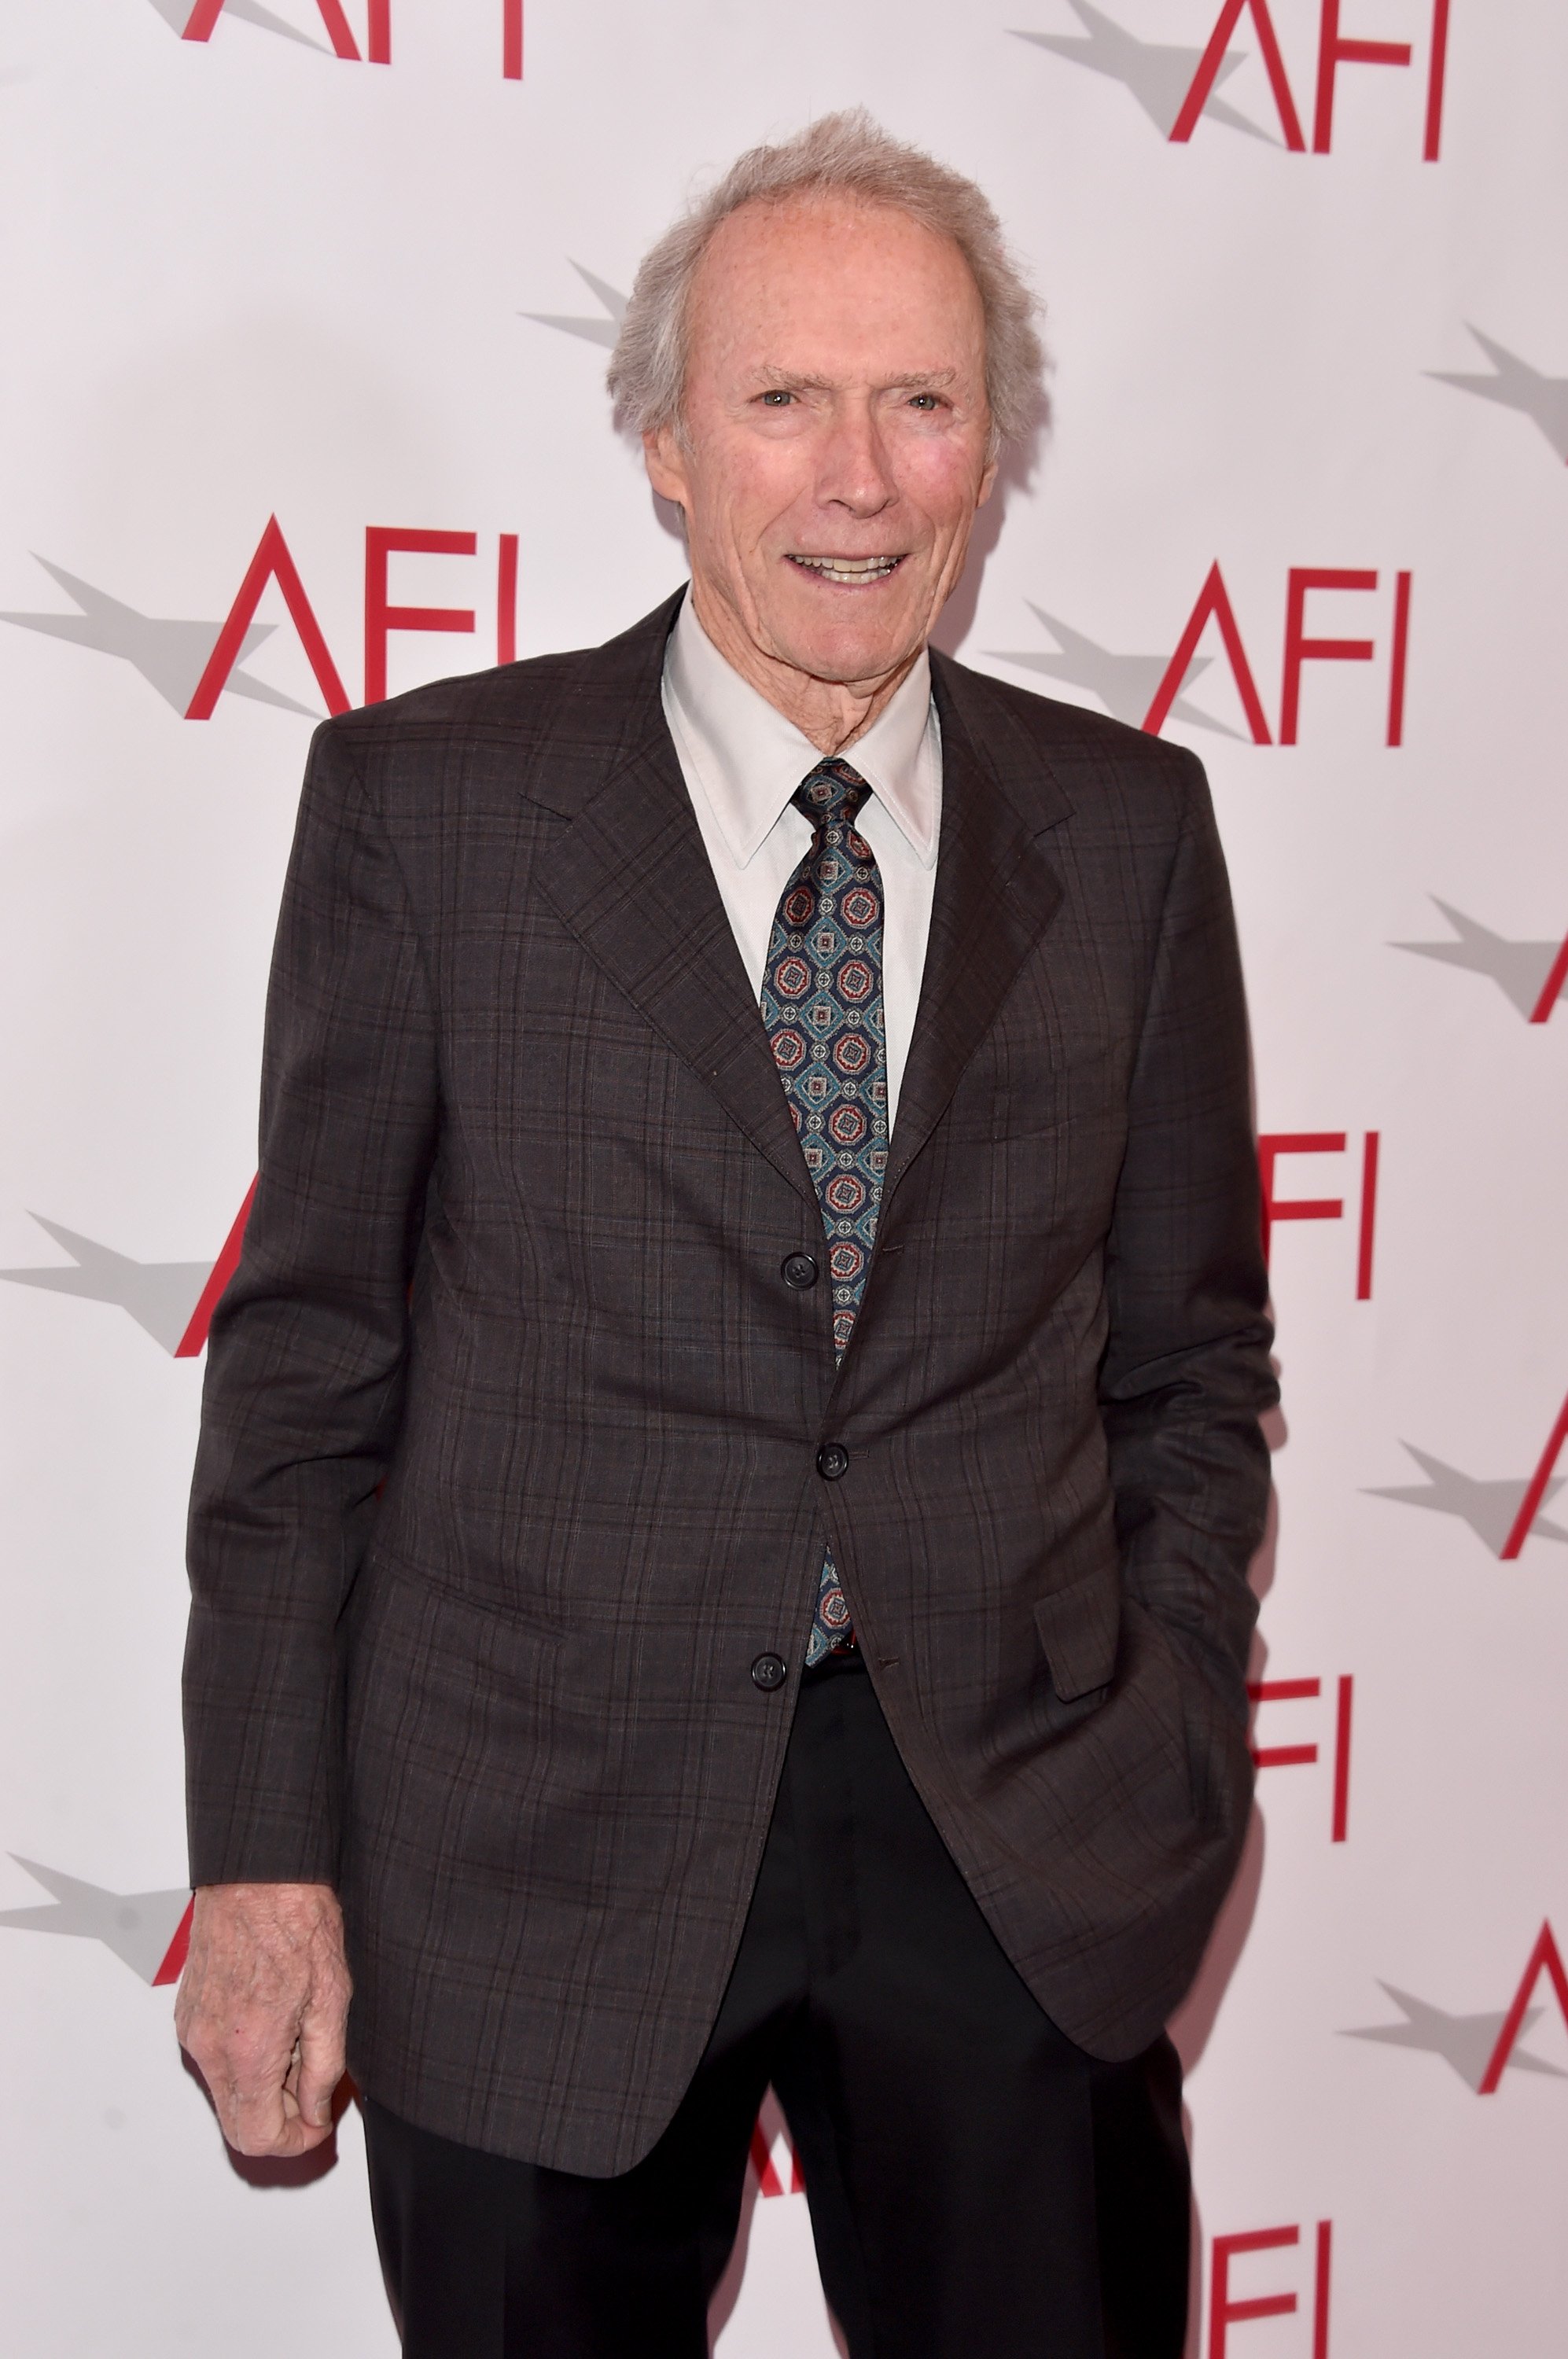 Clint Eastwood attends the AFI Awards in Los Angeles, California on January 6, 2017 | Photo: Getty Images